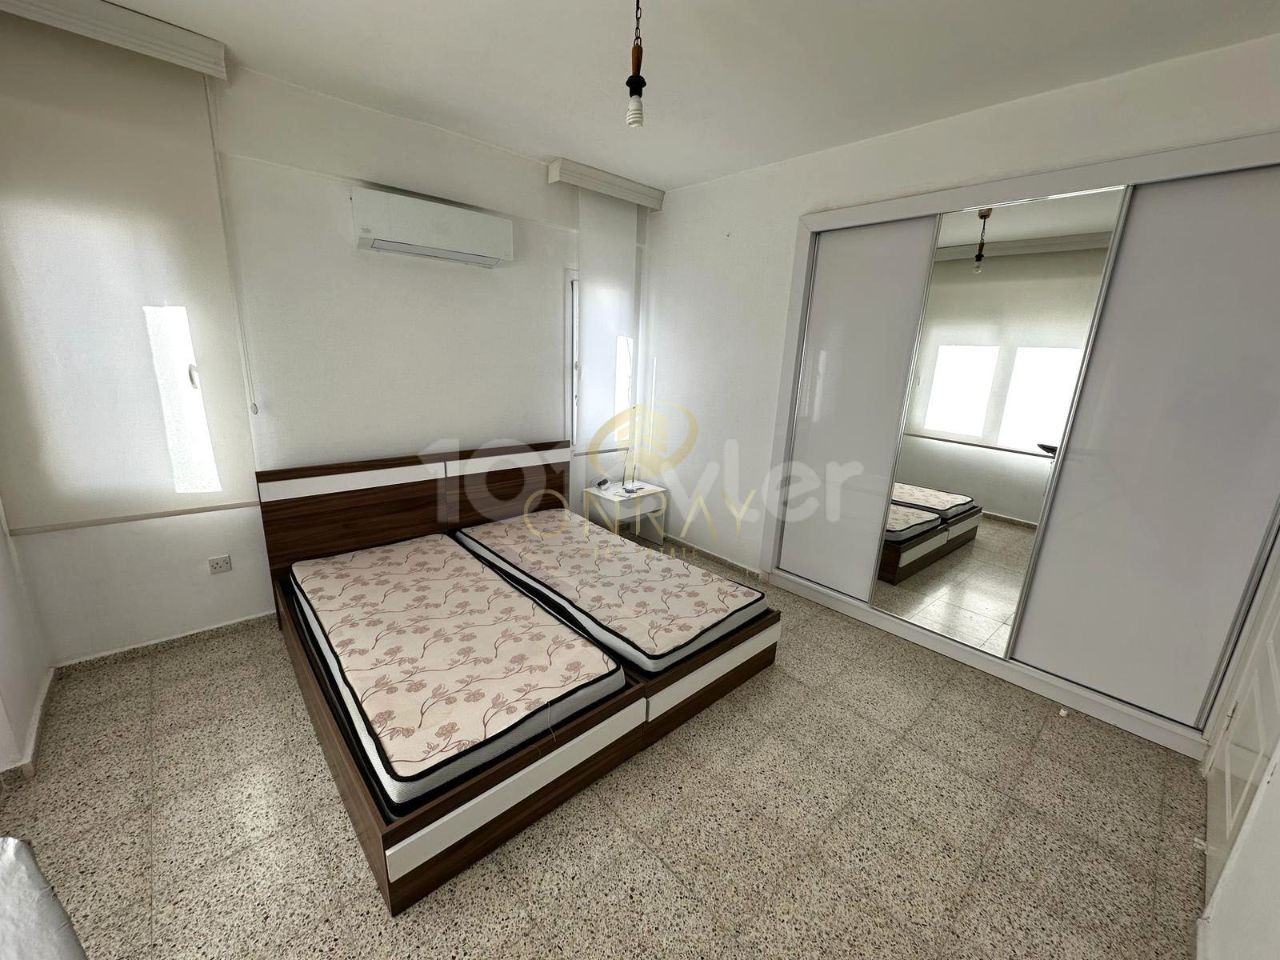 2+1 Fully Furnished Flat for Rent in Haspolat Region.